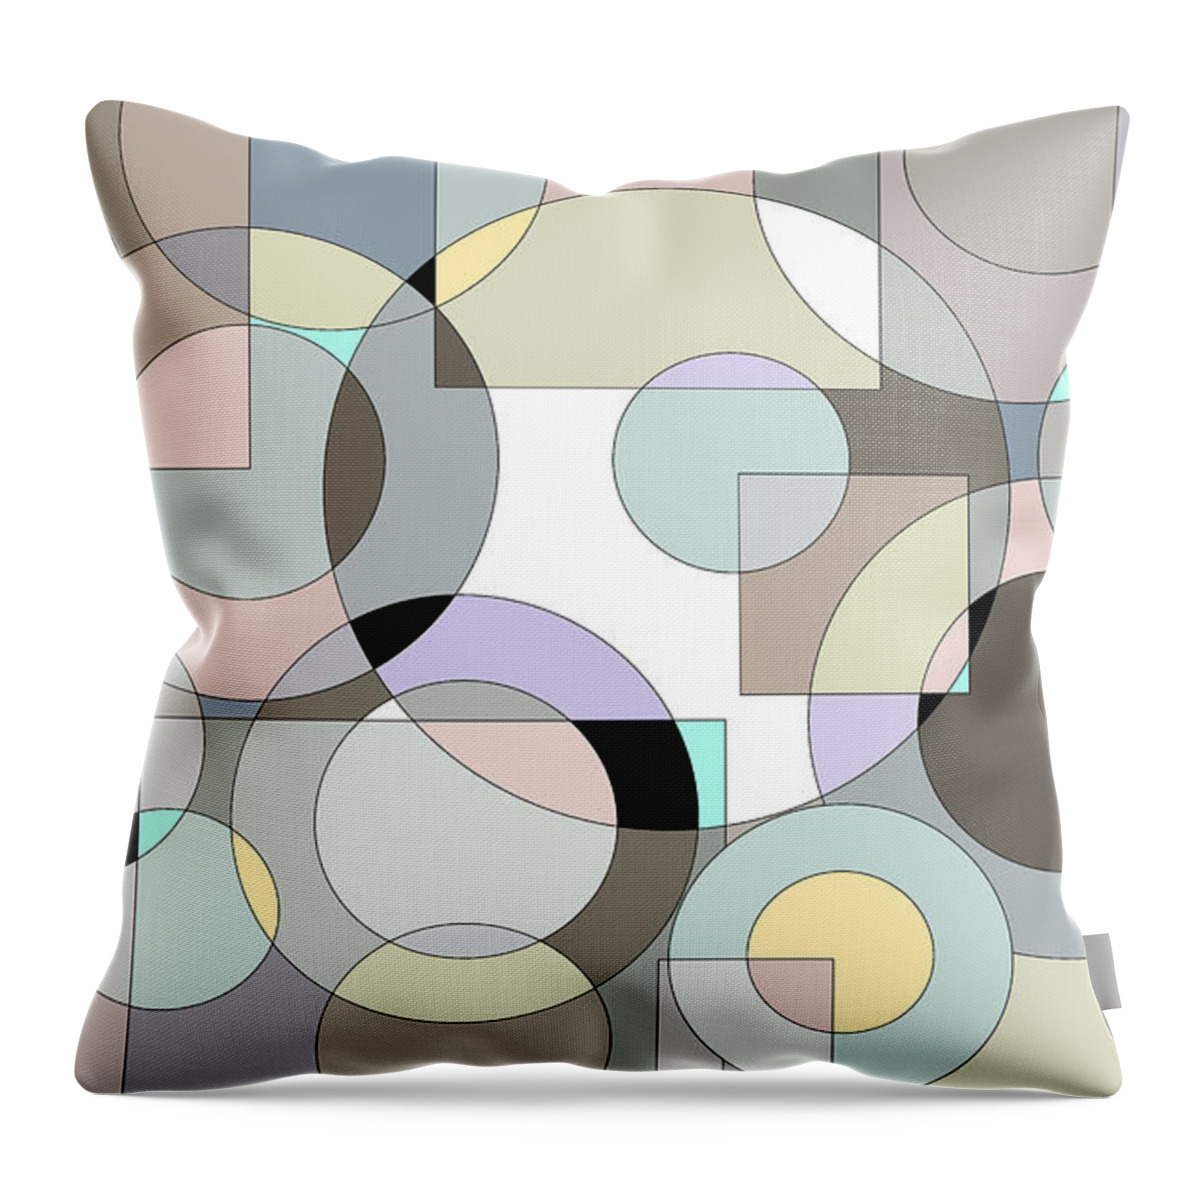 Graphic Grayed Pastels Throw Pillow featuring the digital art Graphic Grayed Pastels by Val Arie